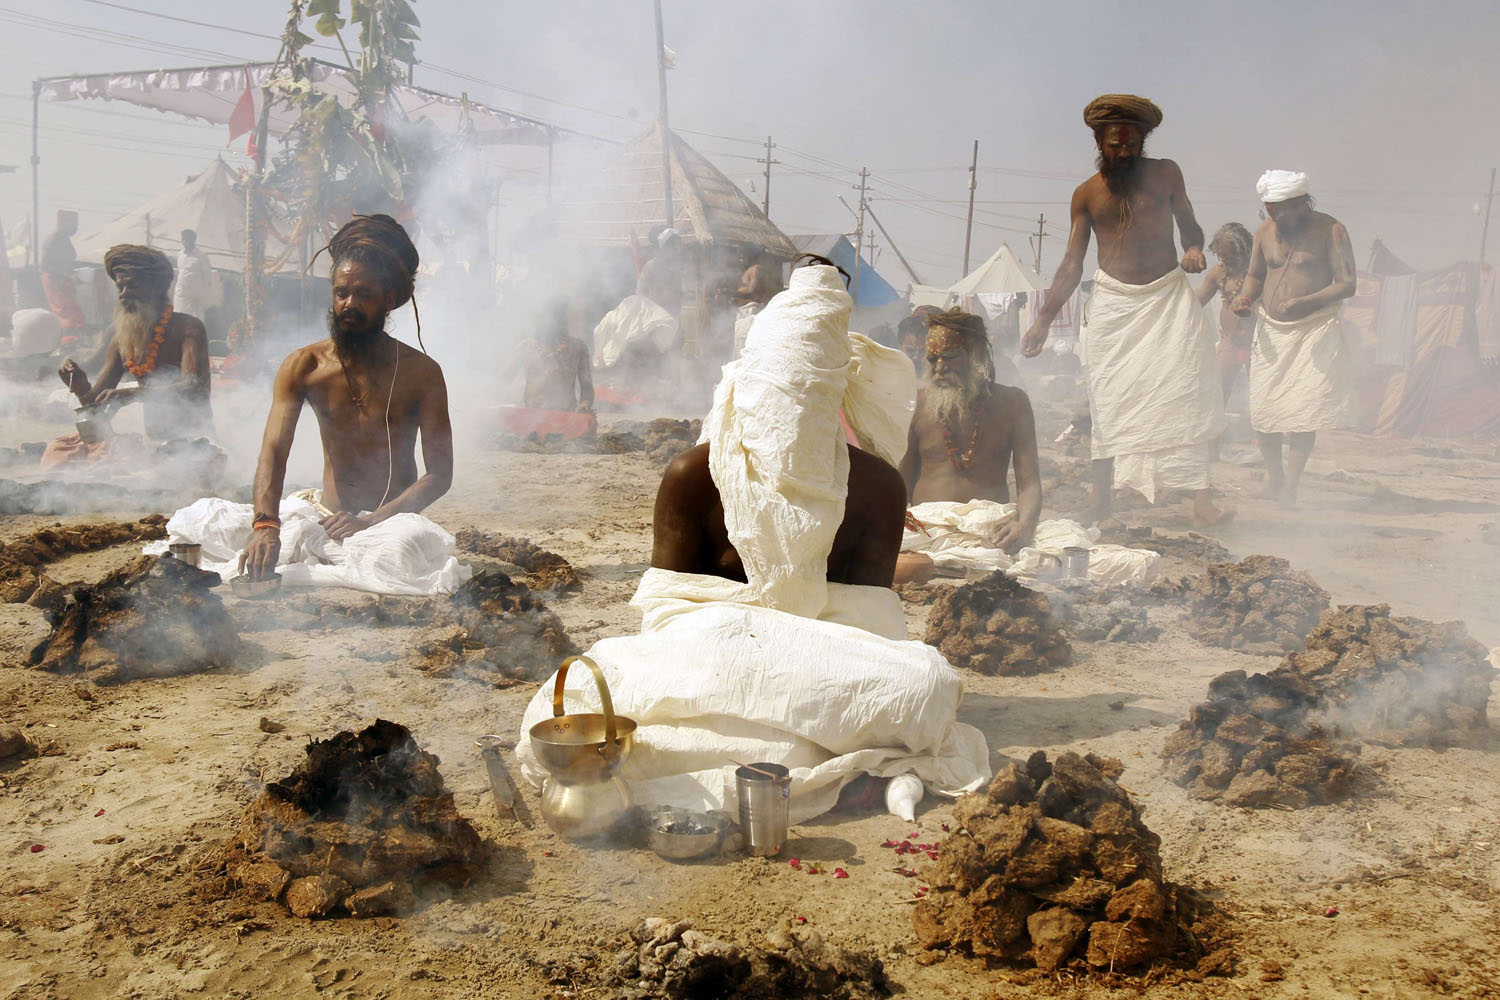 Feb. 4, 2014. Sadhus, or Hindu holy men, perform prayers while sitting inside circles of burning  Upale  (or dried cow dung cakes) on the banks of the river Ganges during the Magh Mela festival in the northern Indian city of Allahabad.